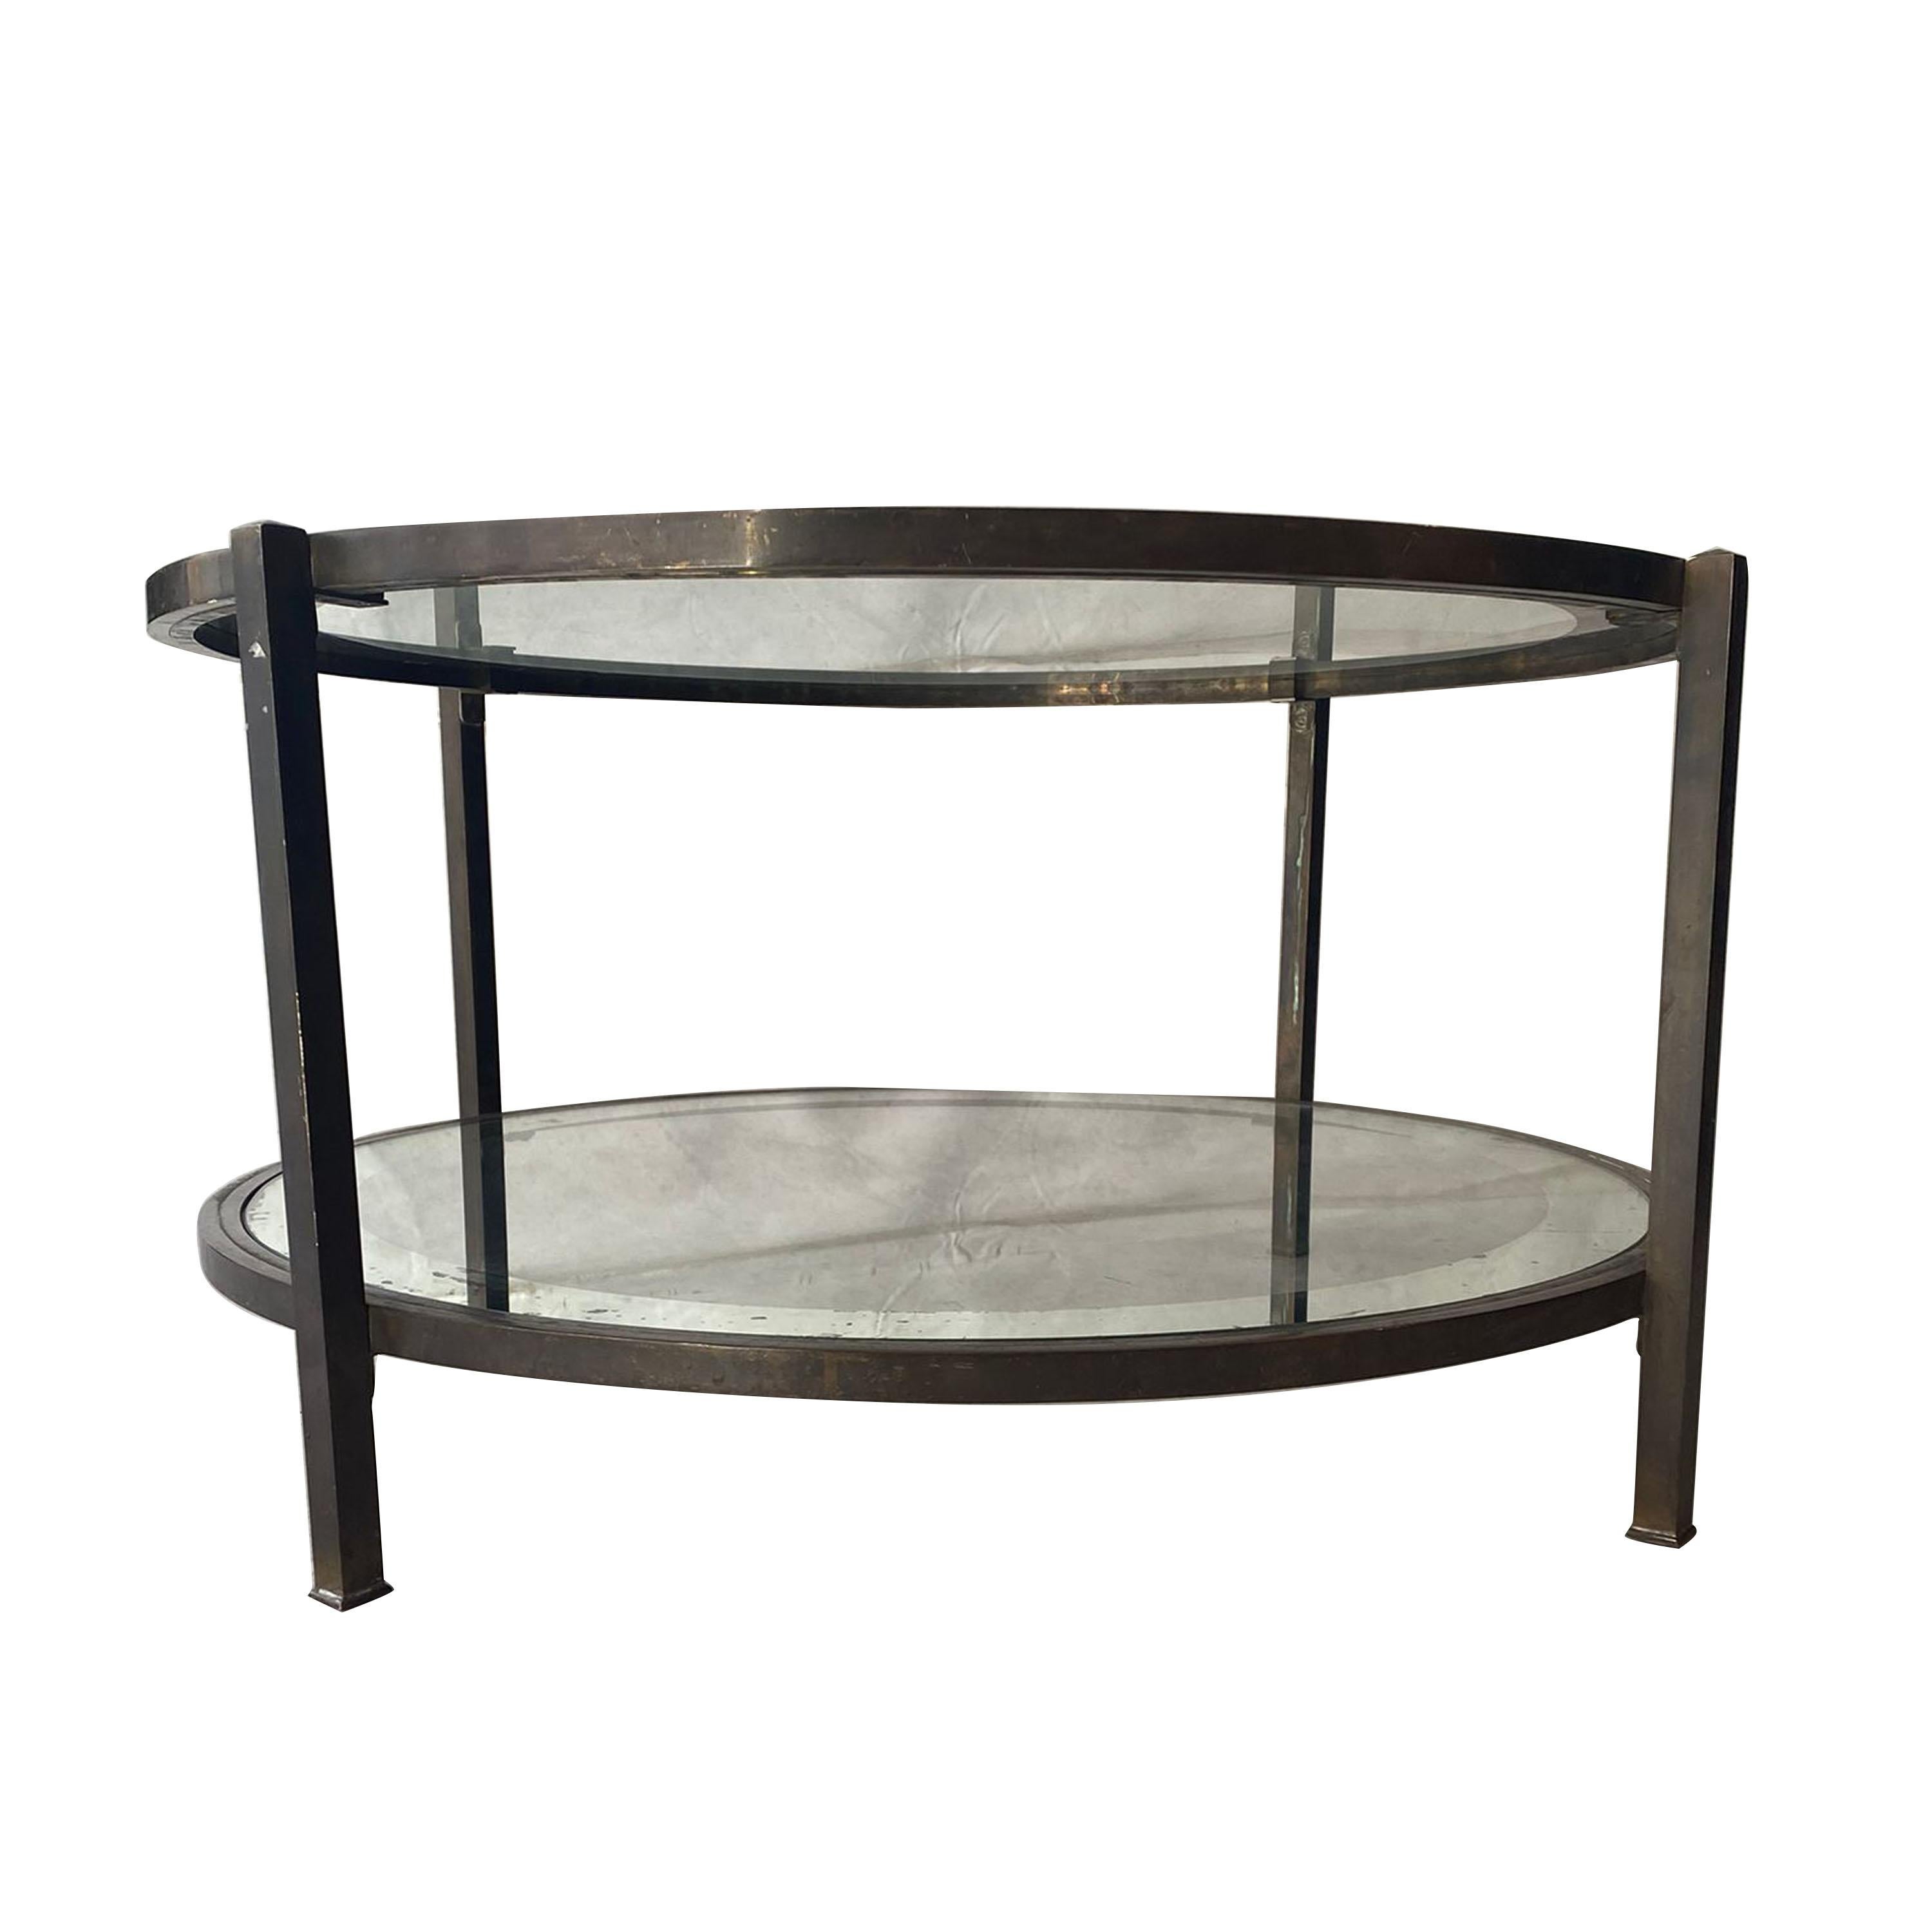 French Mid-Century Modern Rounded Center Table, France, 1960